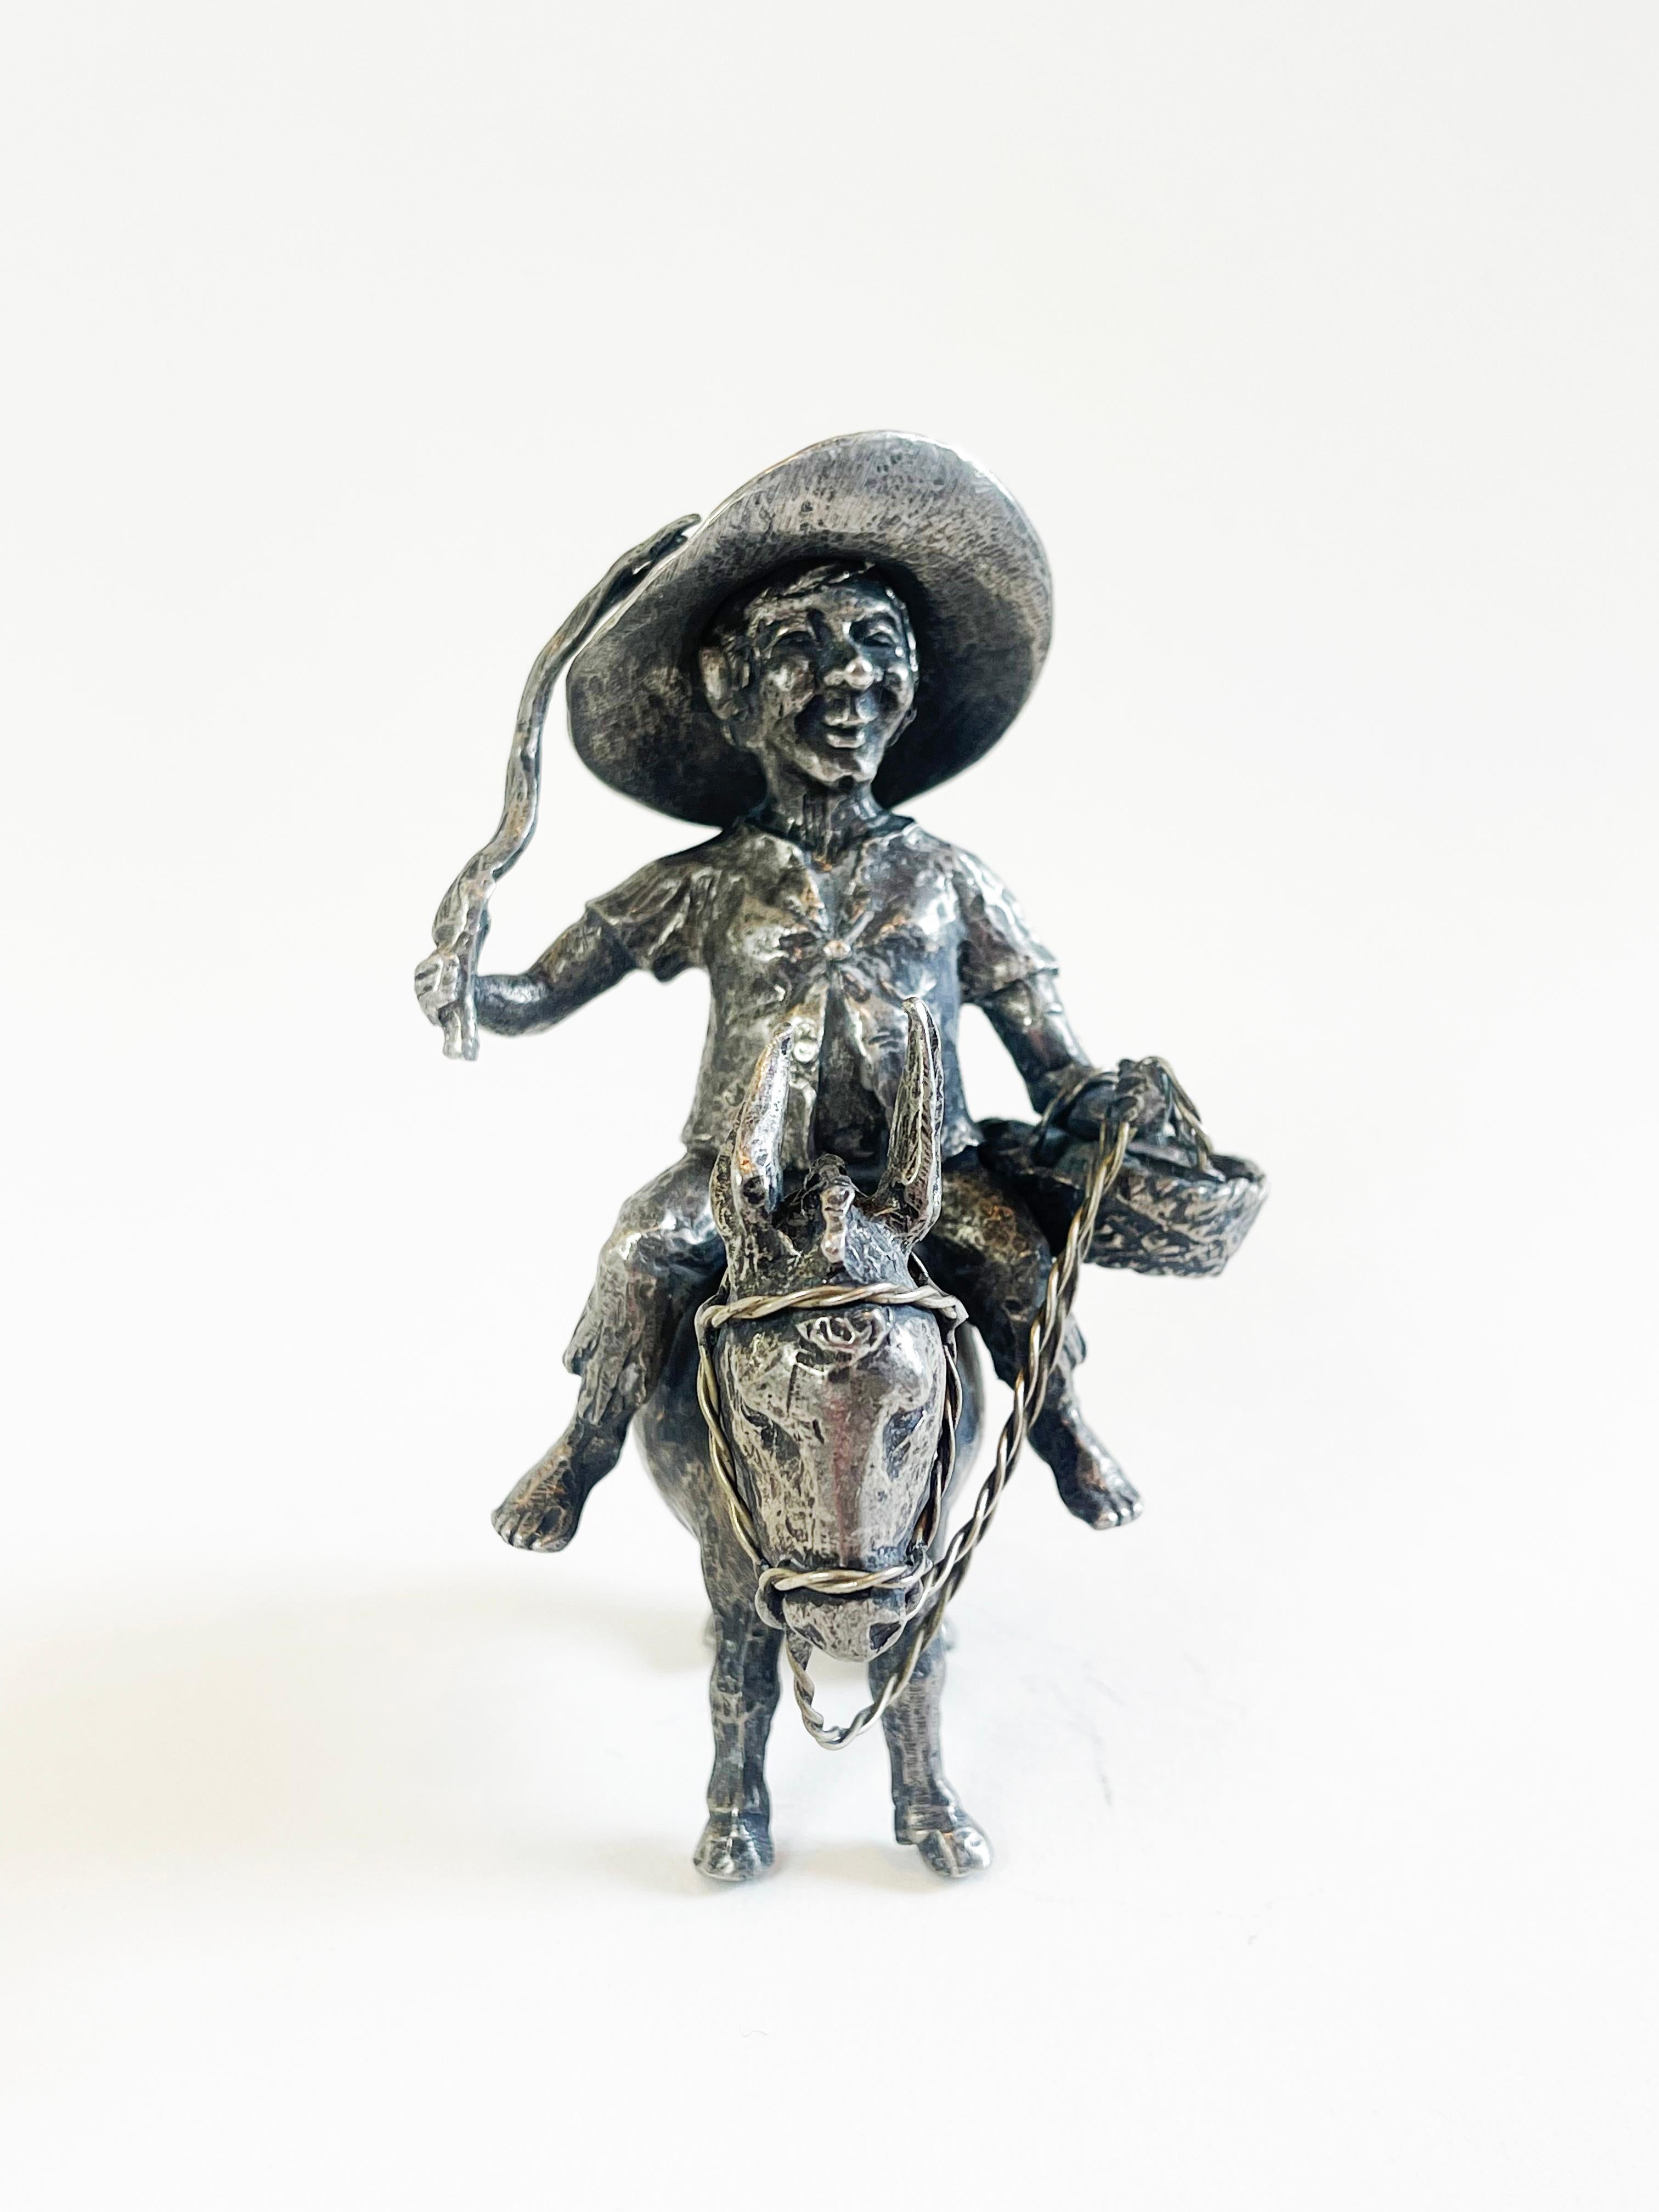 French Signed Sancho Panza Riding his Donkey, Pewter Figurine by Michel Laude, France For Sale